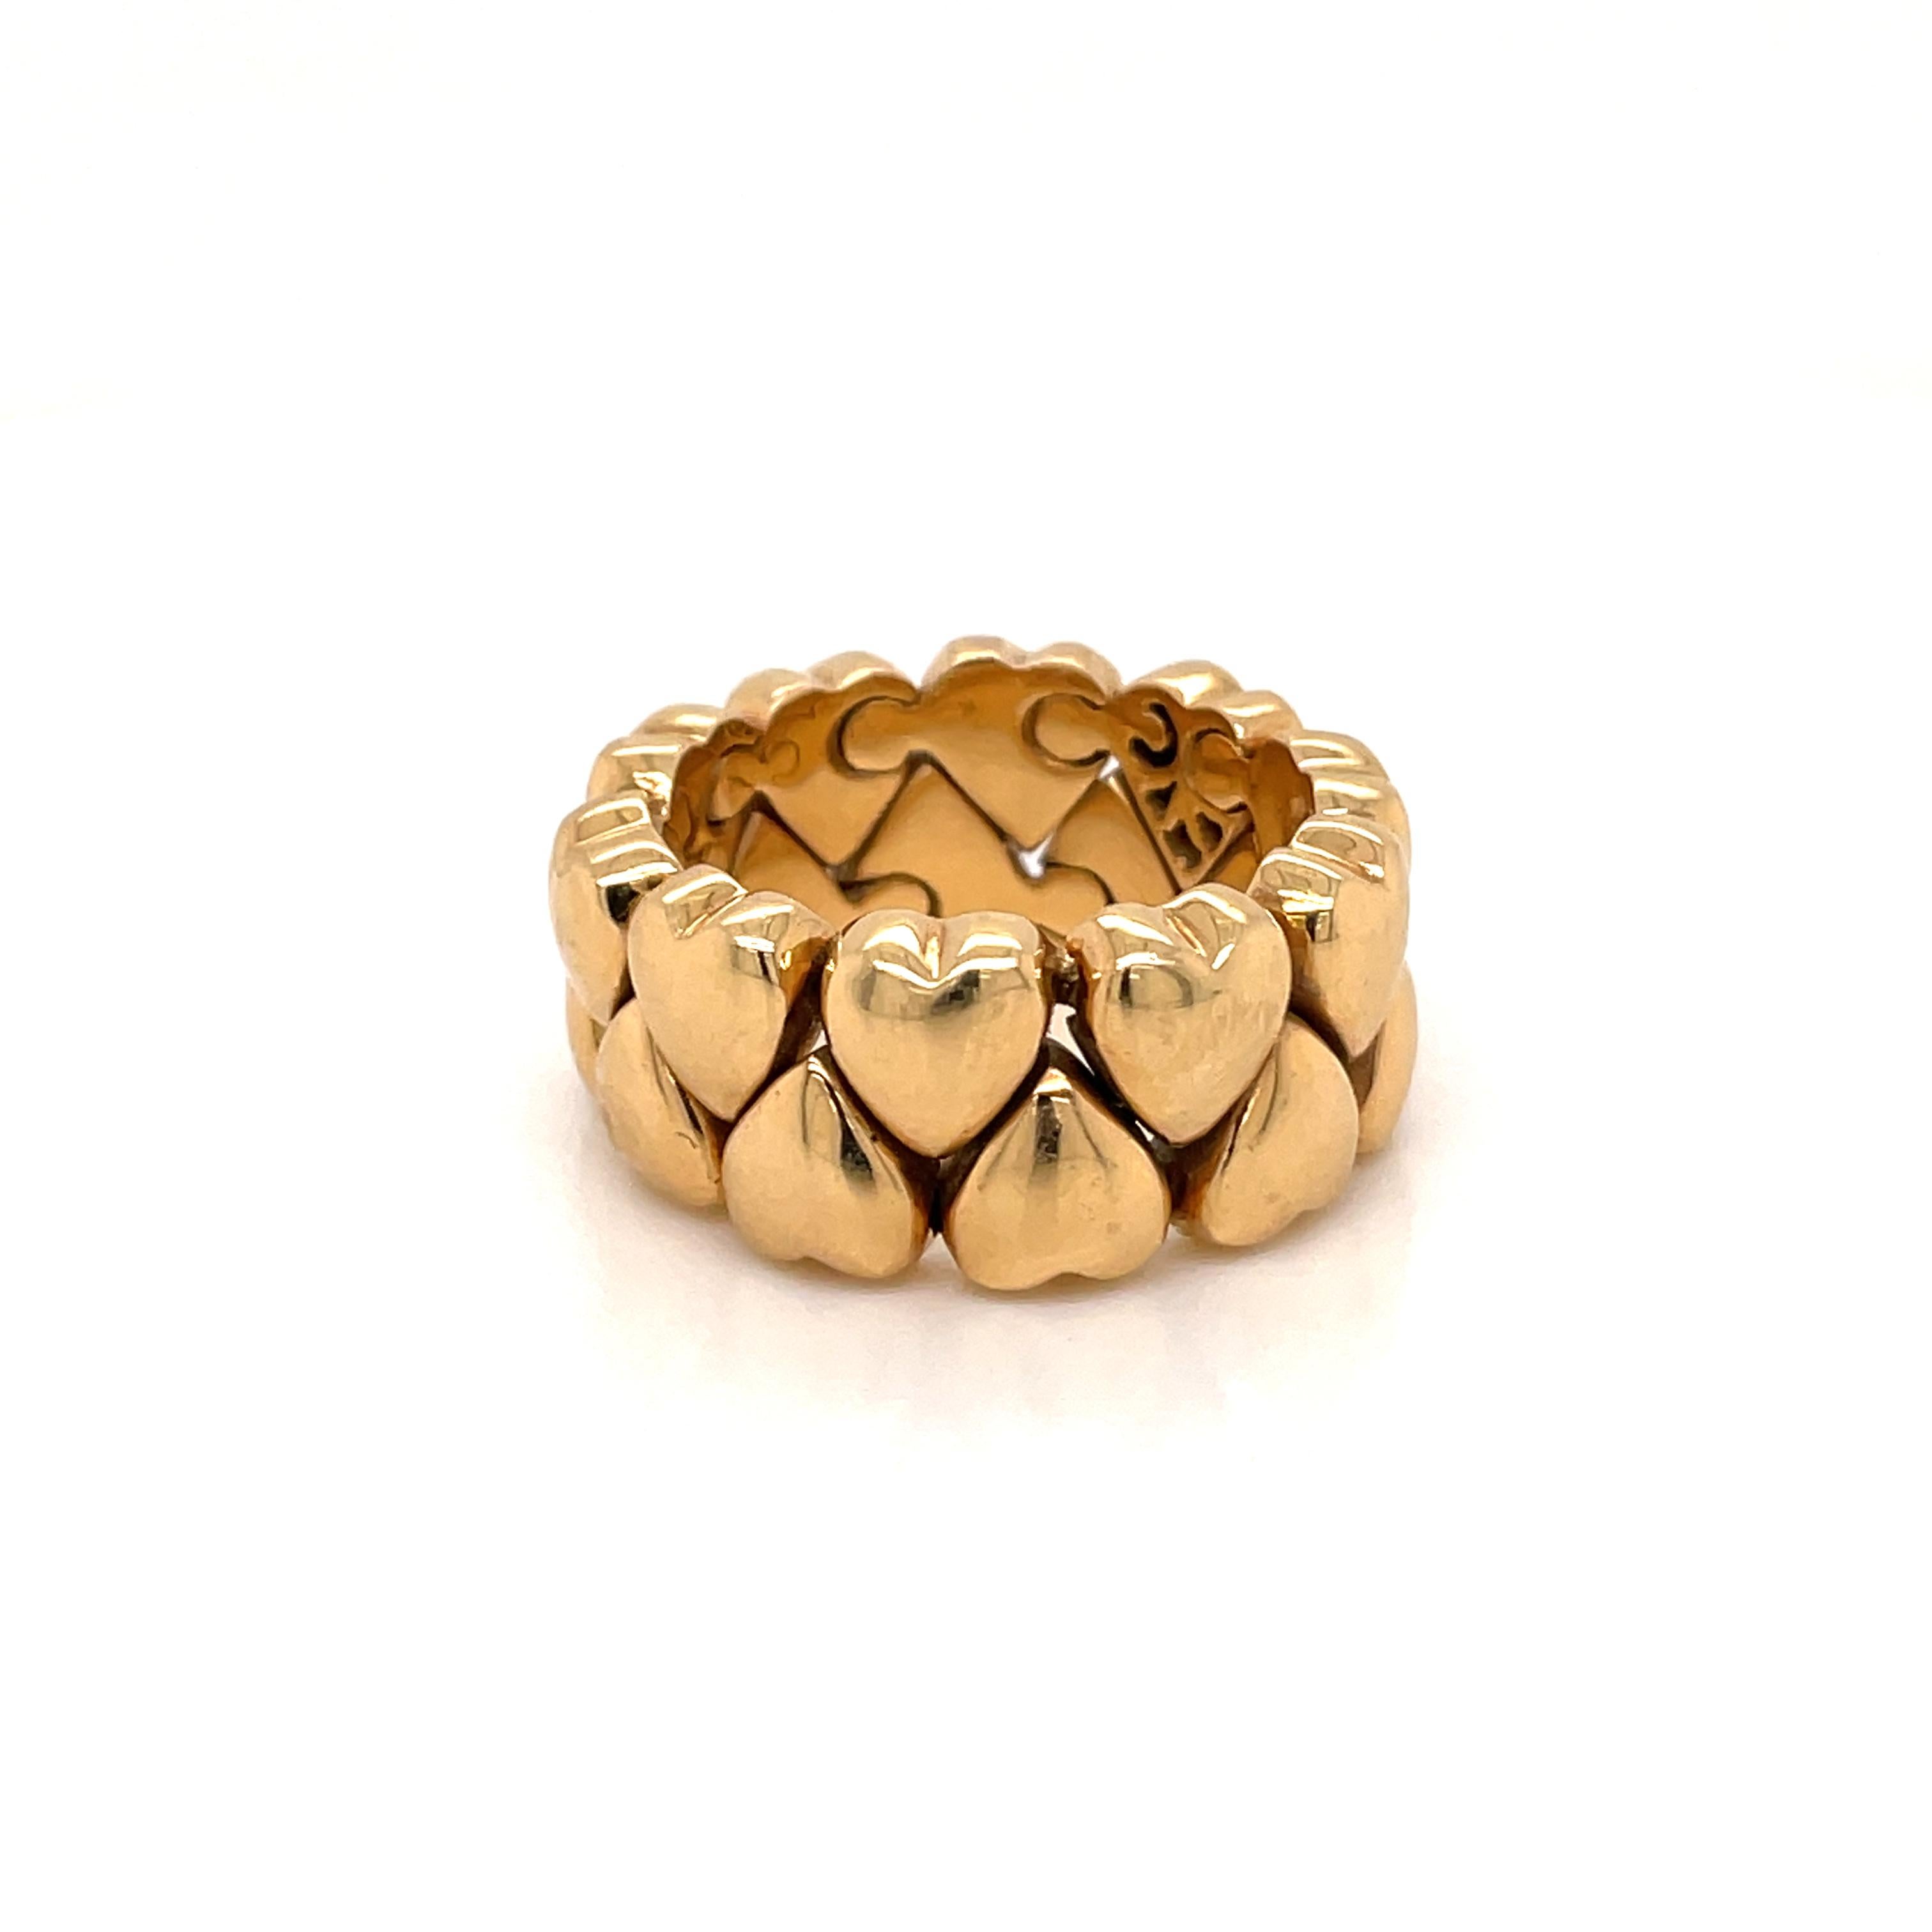 Iconic Cartier Ring from Double Coeurs collection
Flexible band ring comprised of two rows of polished gold hearts, it features one fully diamond pave heart, approx. 0.15 carats F color IF

Marked: fully signed Cartier, 1995, numbered, 750. Weight -